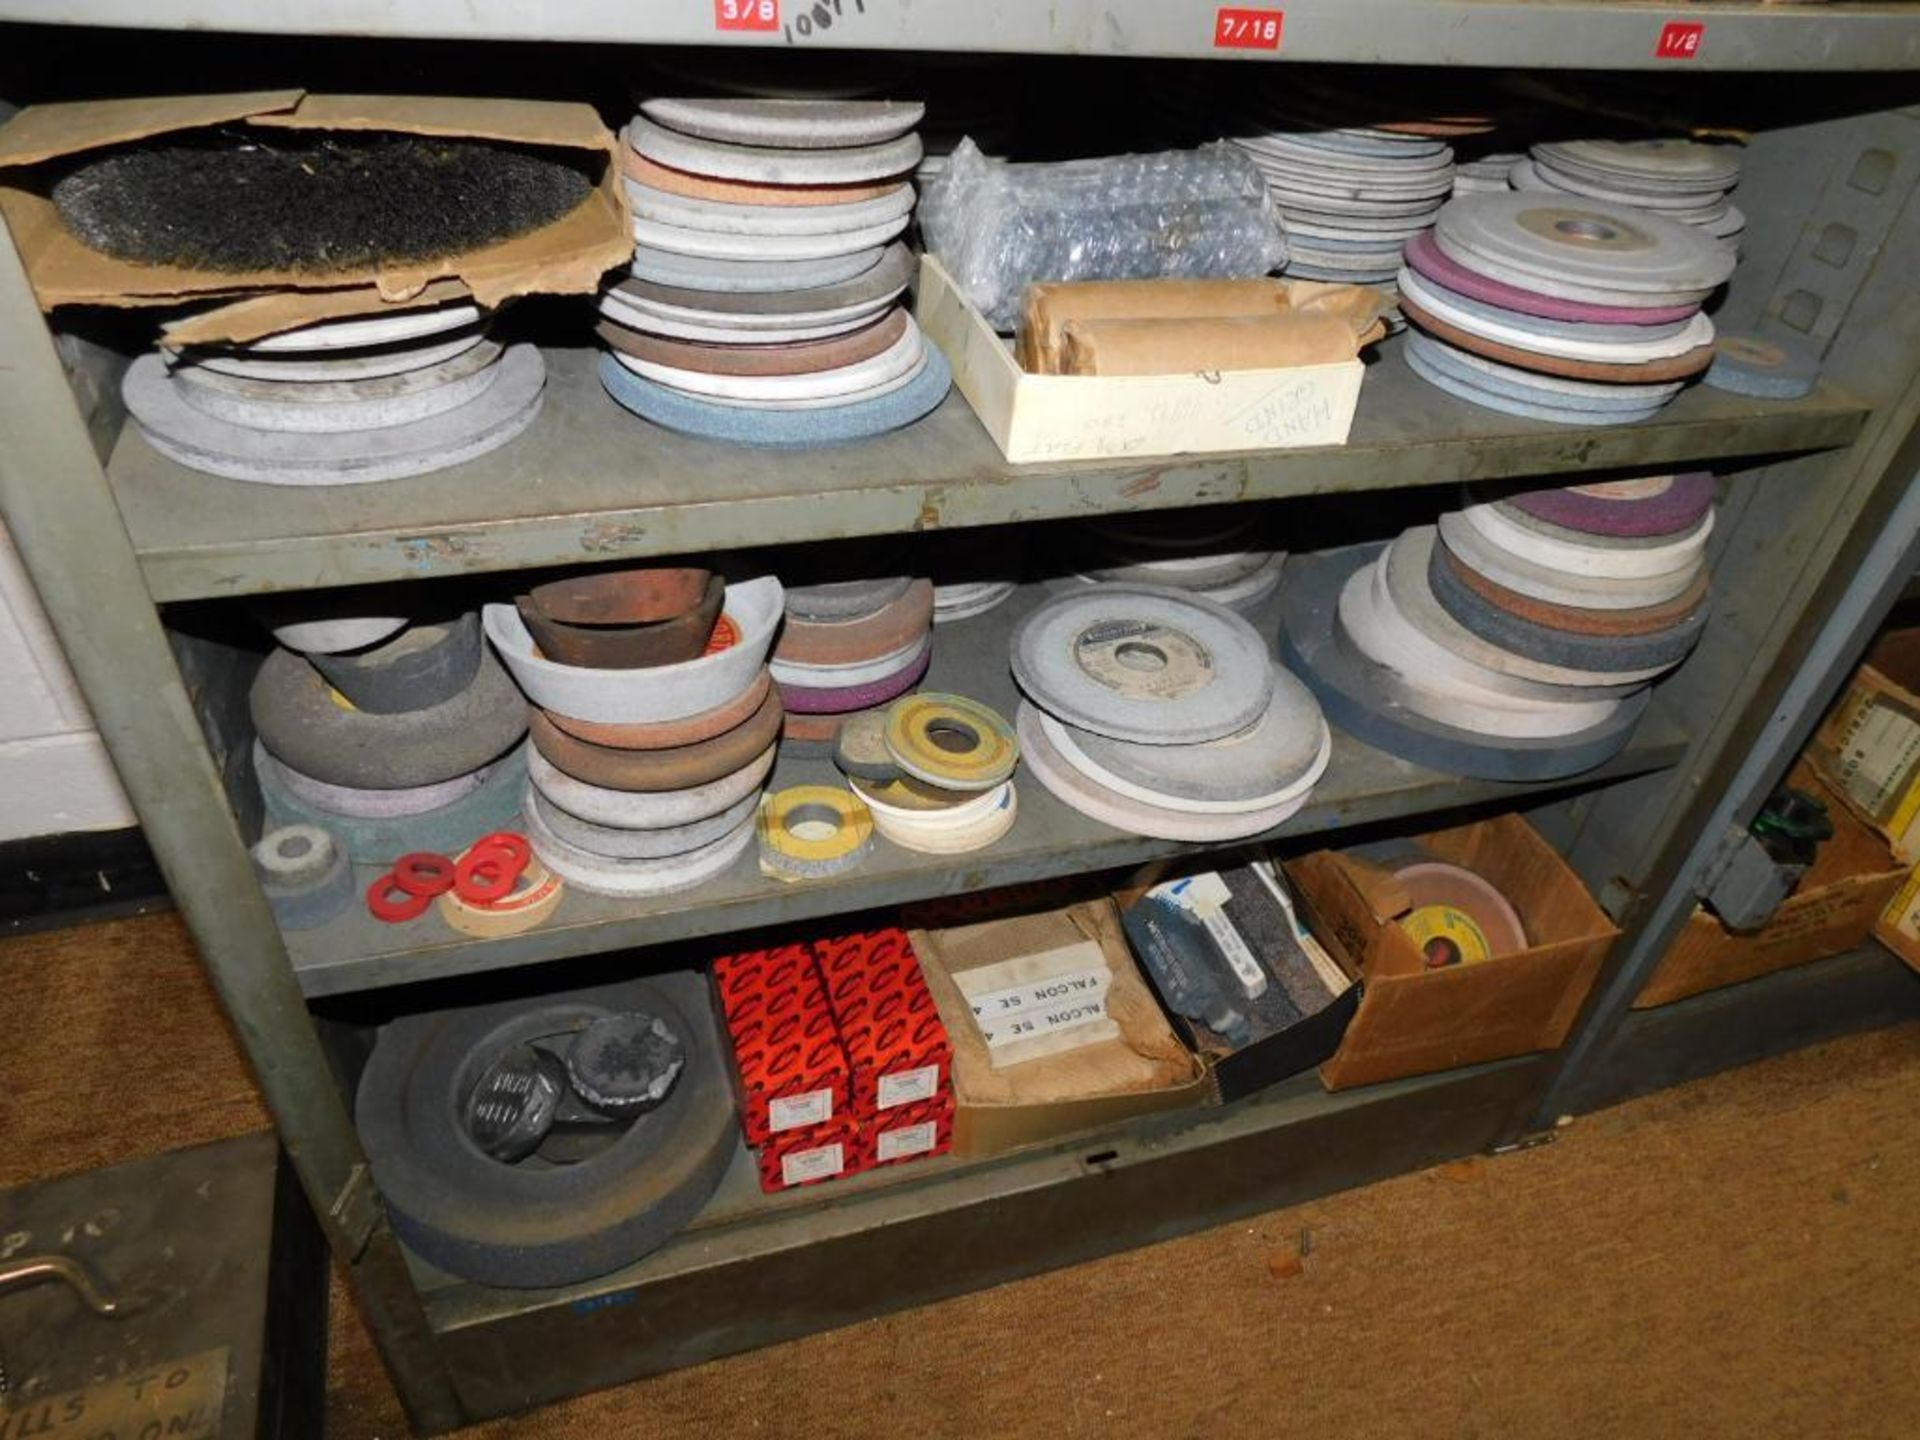 LOT: Contents of Rack: Large Quantity of Assorted Grinding Wheels, Cut Off Wheels, Polishing Stones, - Image 3 of 15